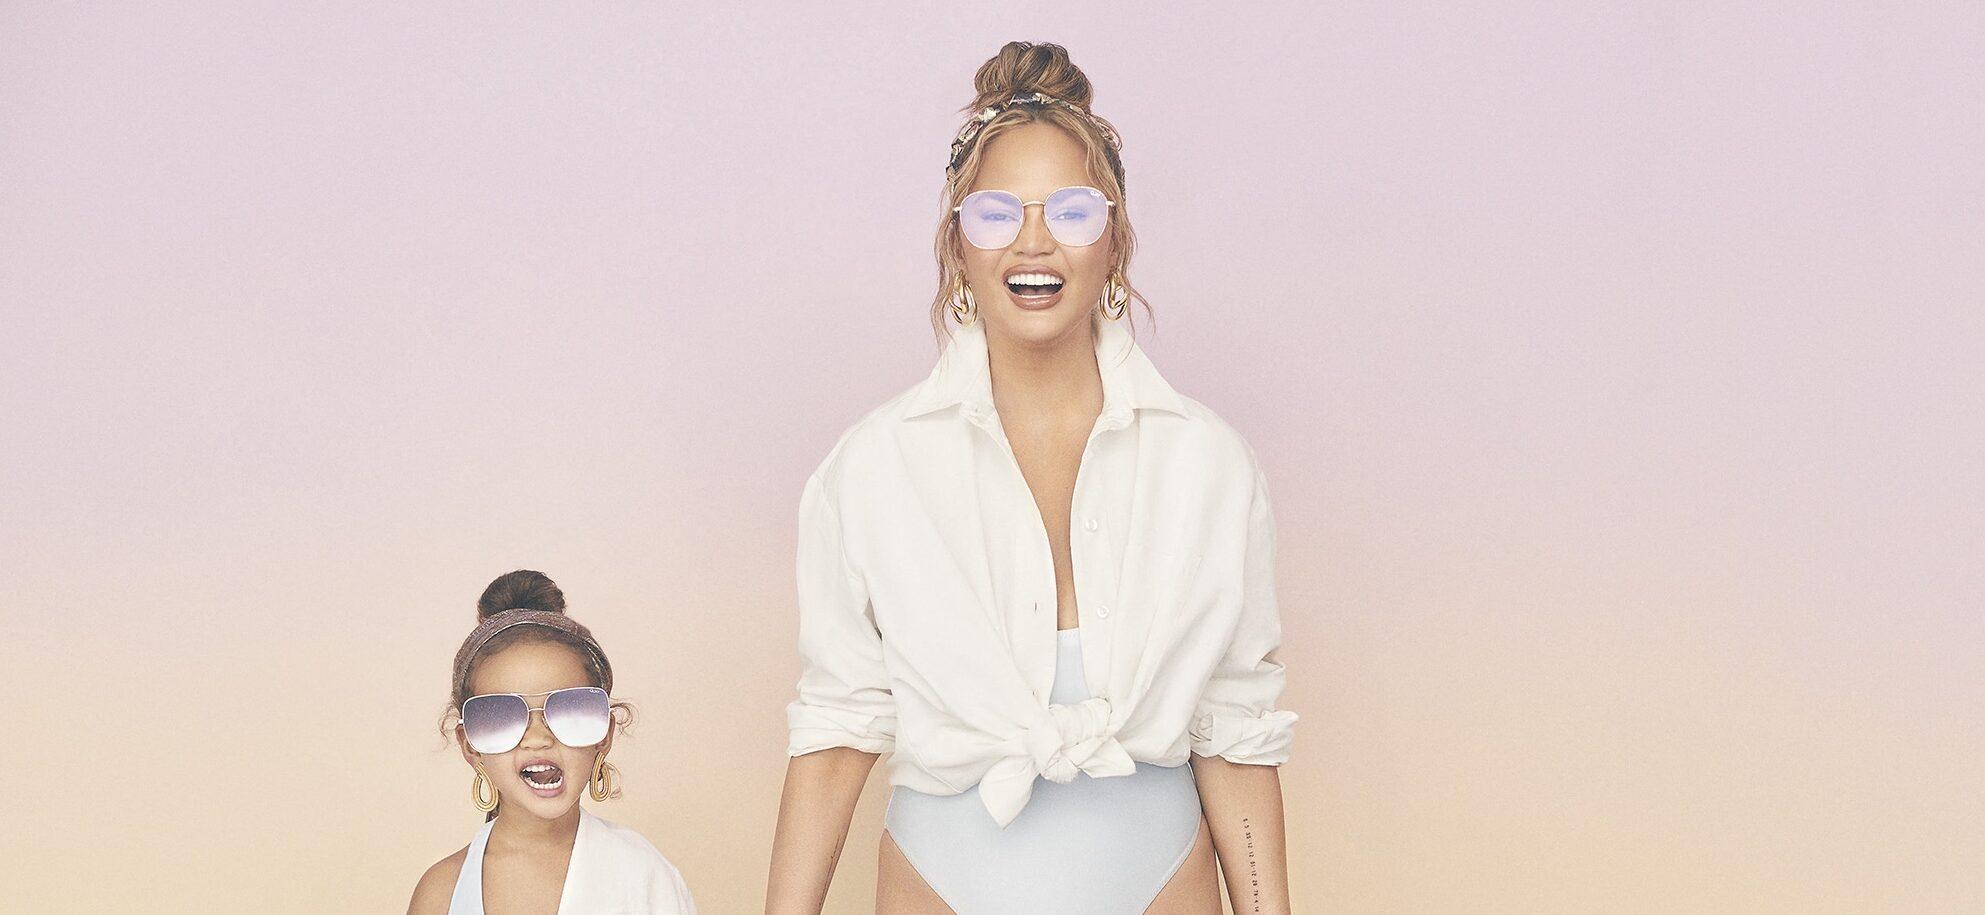 Chrissy Teigen models new QUAY sunglasses collection along with her daughter Luna, aged 3